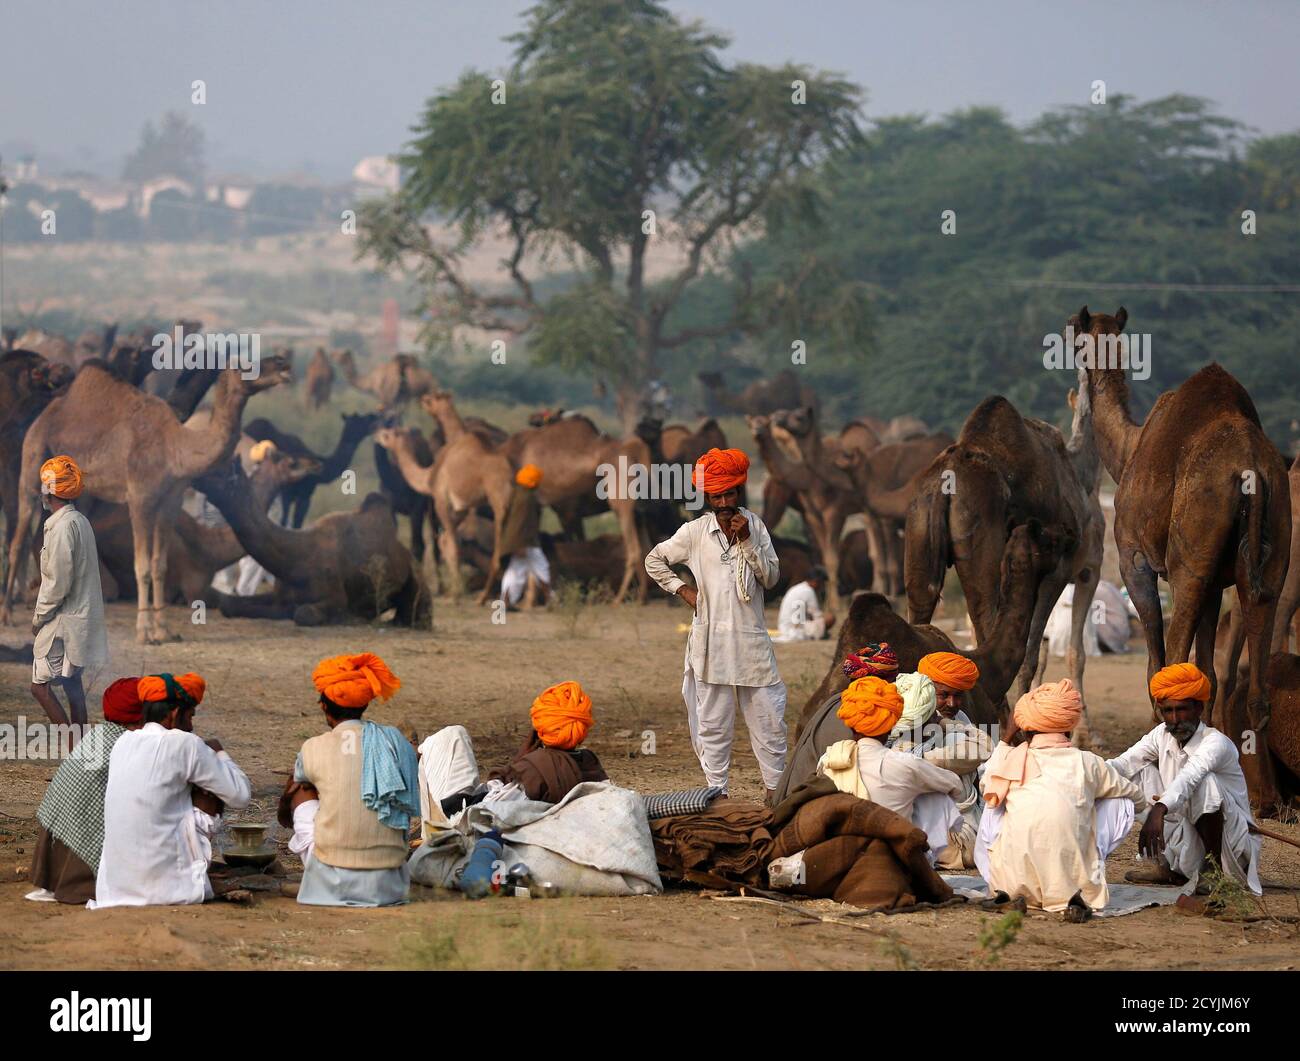 Camel traders wearing traditional headgears sit next to their camels at the  Pushkar Fair in the Indian desert state of Rajasthan November 10, 2013.  Many international and domestic tourists throng to Pushkar